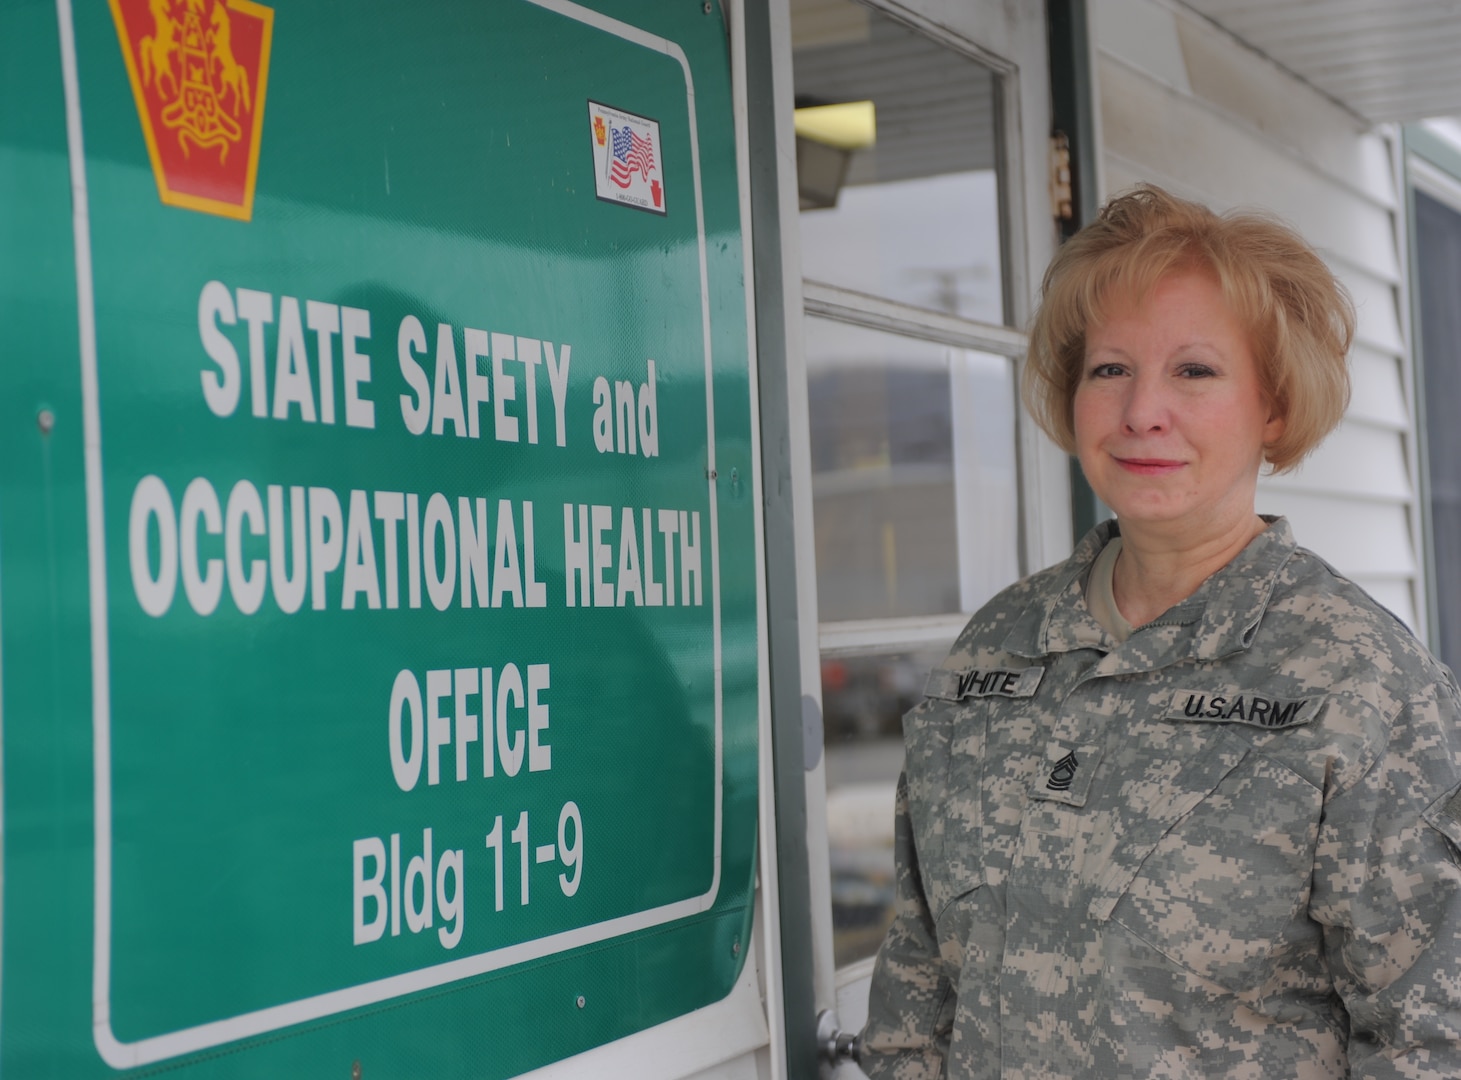 In a career that spans 40 years, Master Sgt. Terry White has seen many changes.